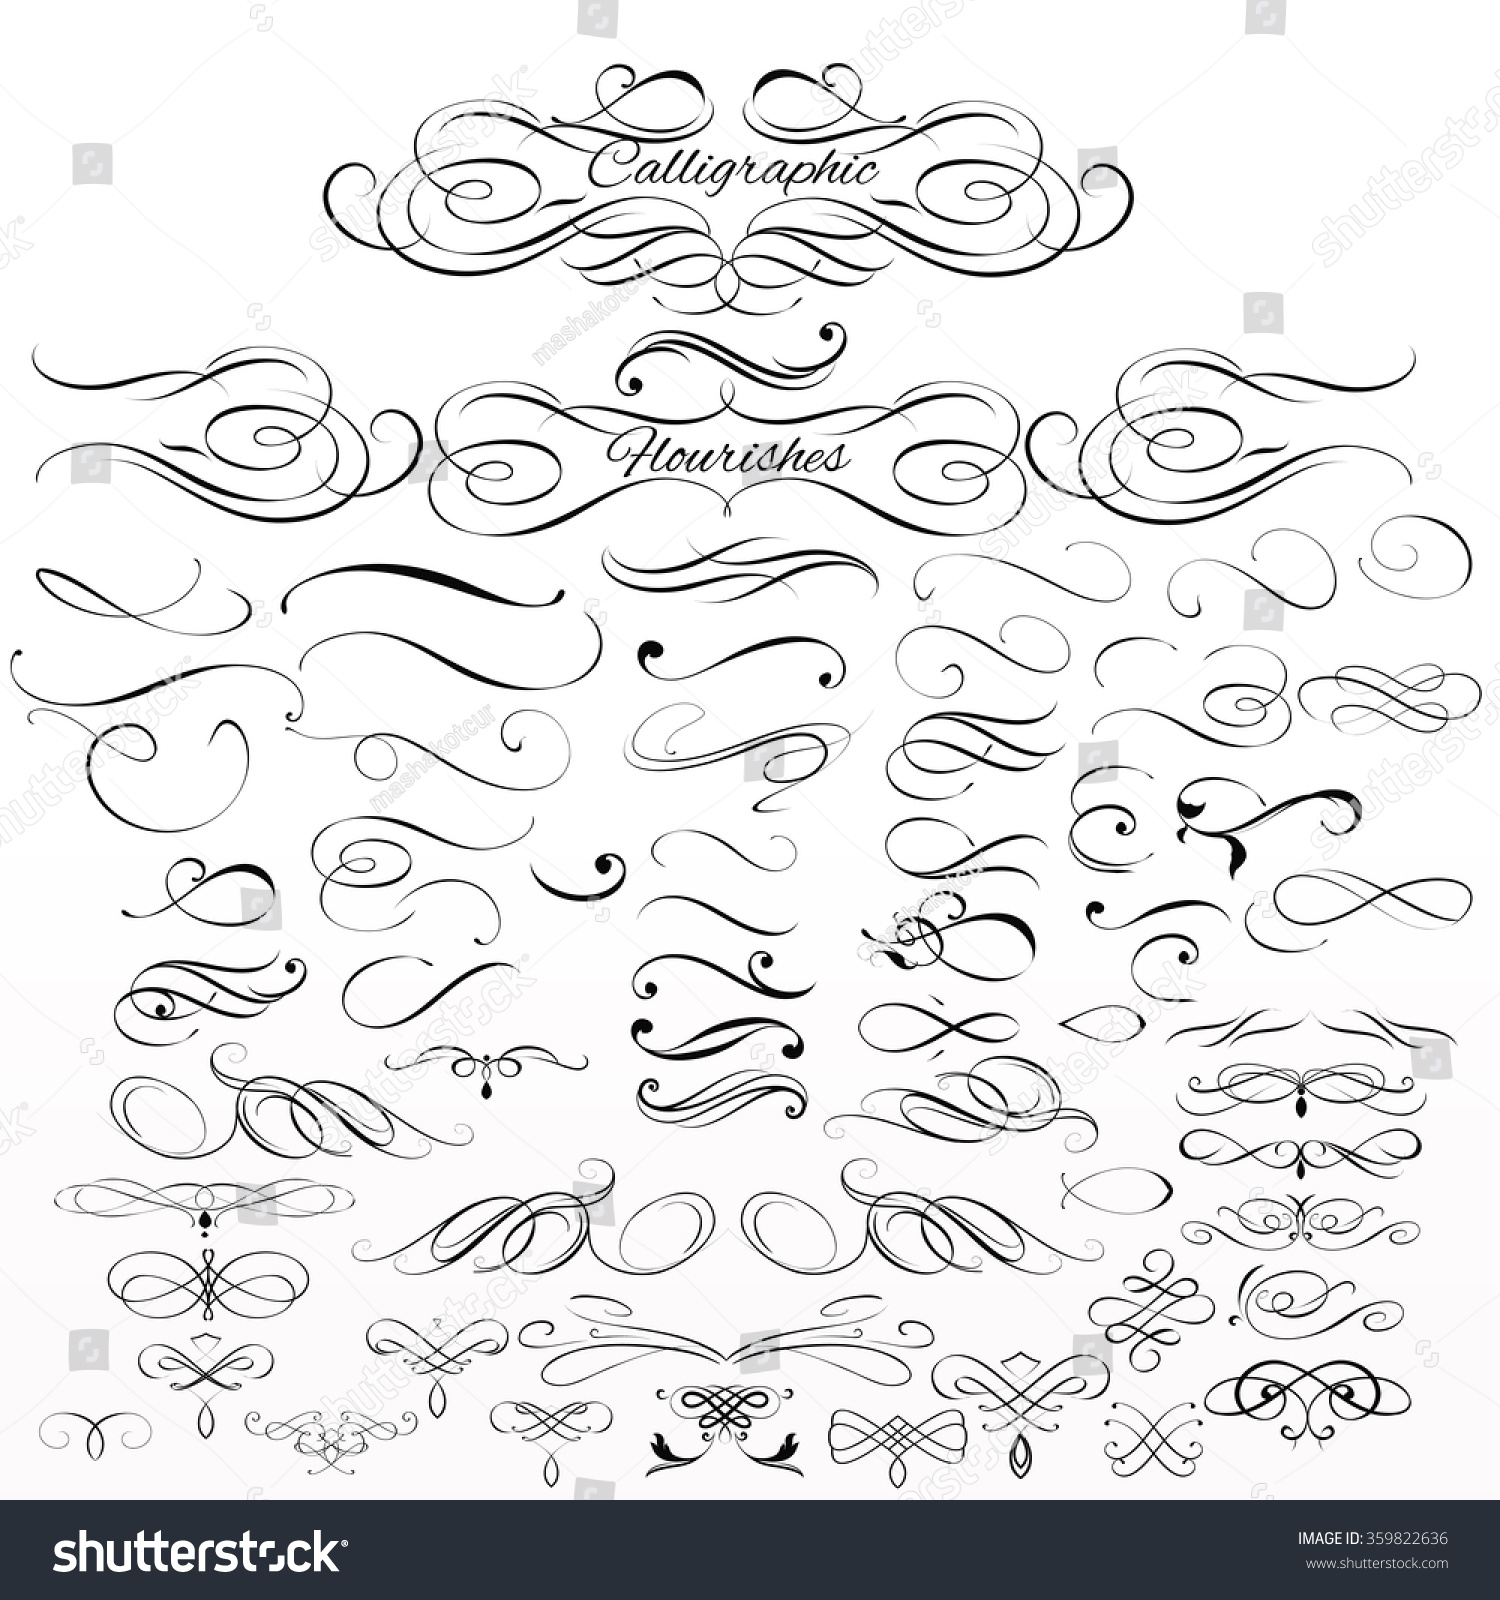 Collection Or Set Of Vintage Styled Calligraphic Flourishes Stock ...